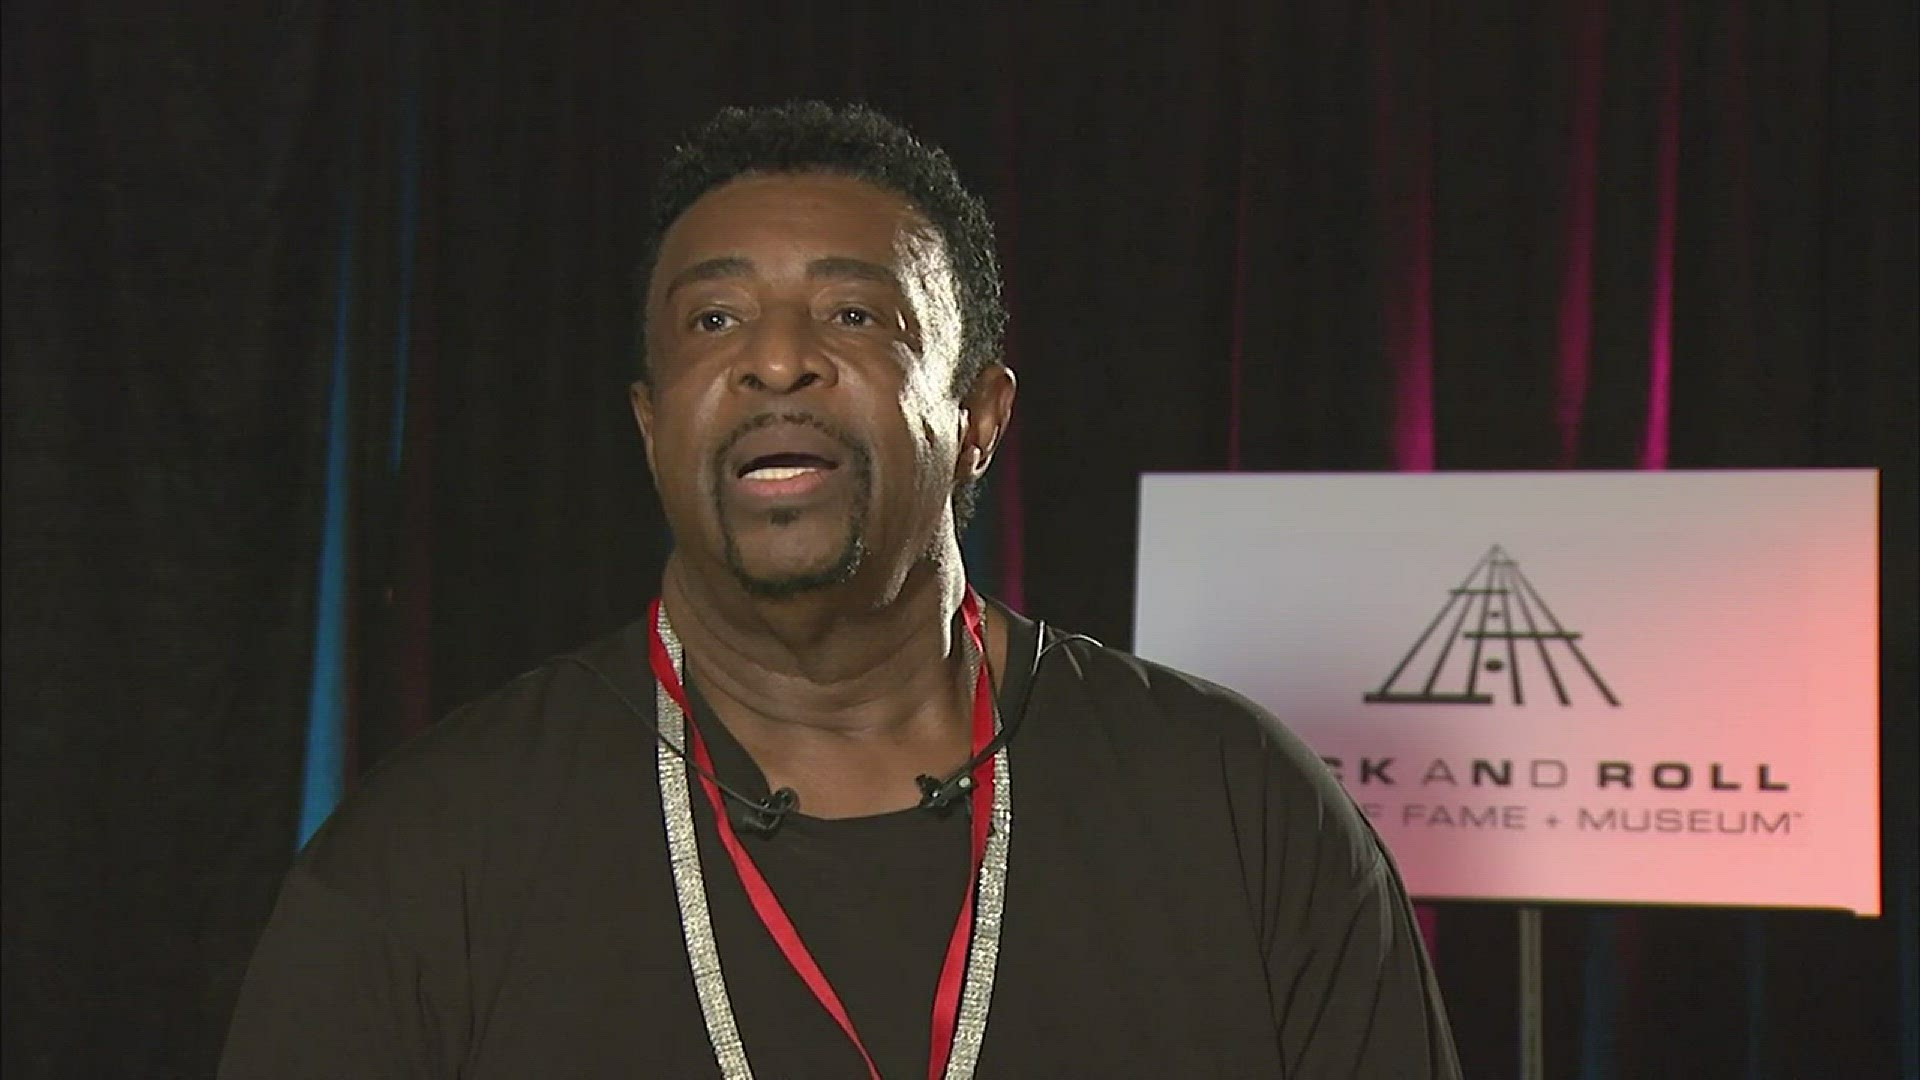 2011 interview with Rock and Roll Hall of Fame Inductee and member of The Temptations, Dennis Edwards.  Edwards was in Cleveland to perform at the Rock Hall's American Music Masters tribute to Aretha Franklin and spoke about Aretha, his time in the Tempta